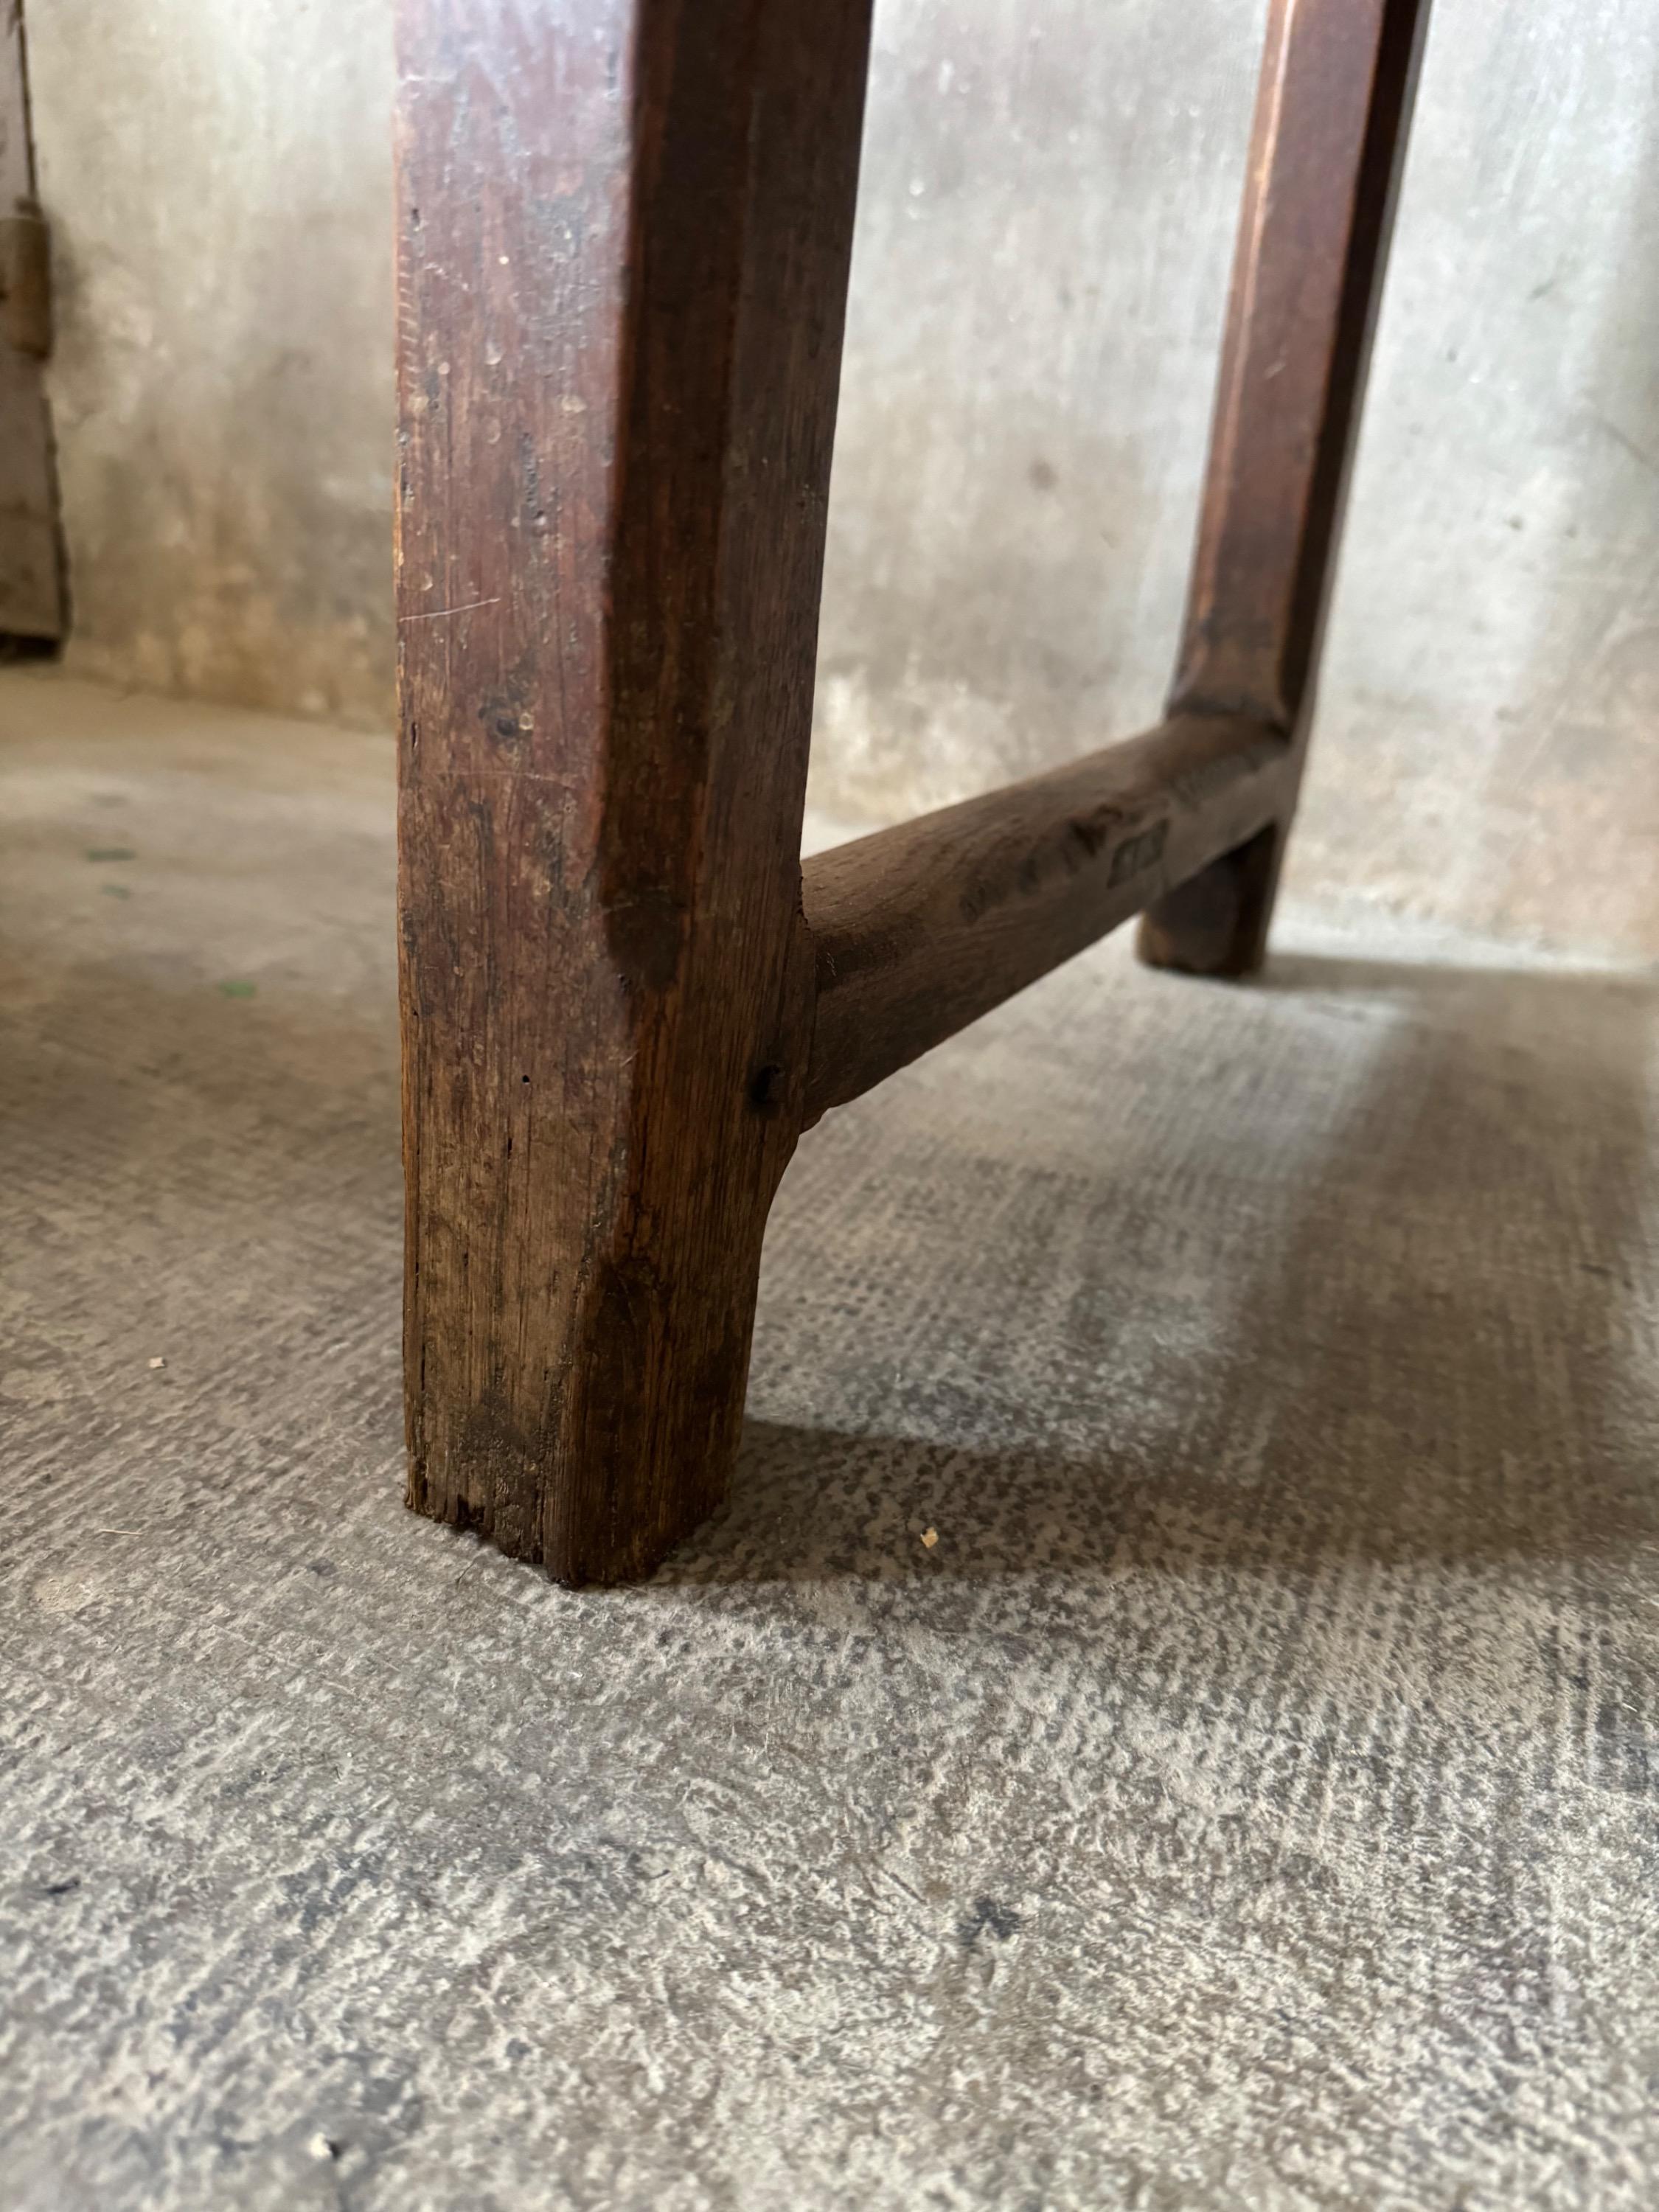 Big 19th Century French Table With Nice Time Patina, Dim = 234 x 70 x 73 cm